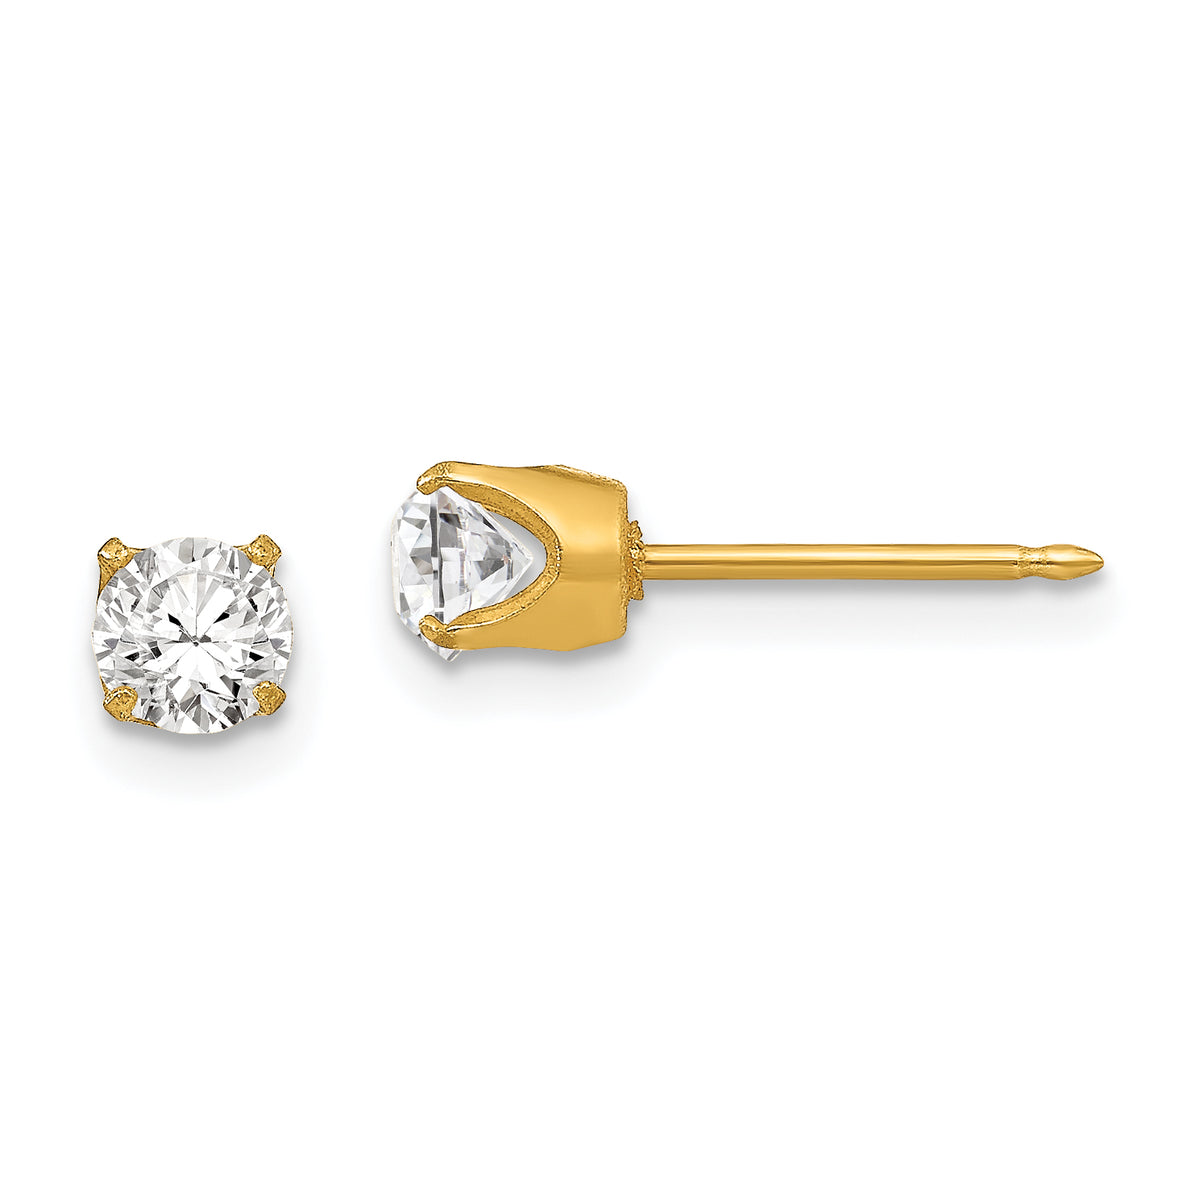 Inverness 24k Plated 5mm Austrian Crystal Earrings